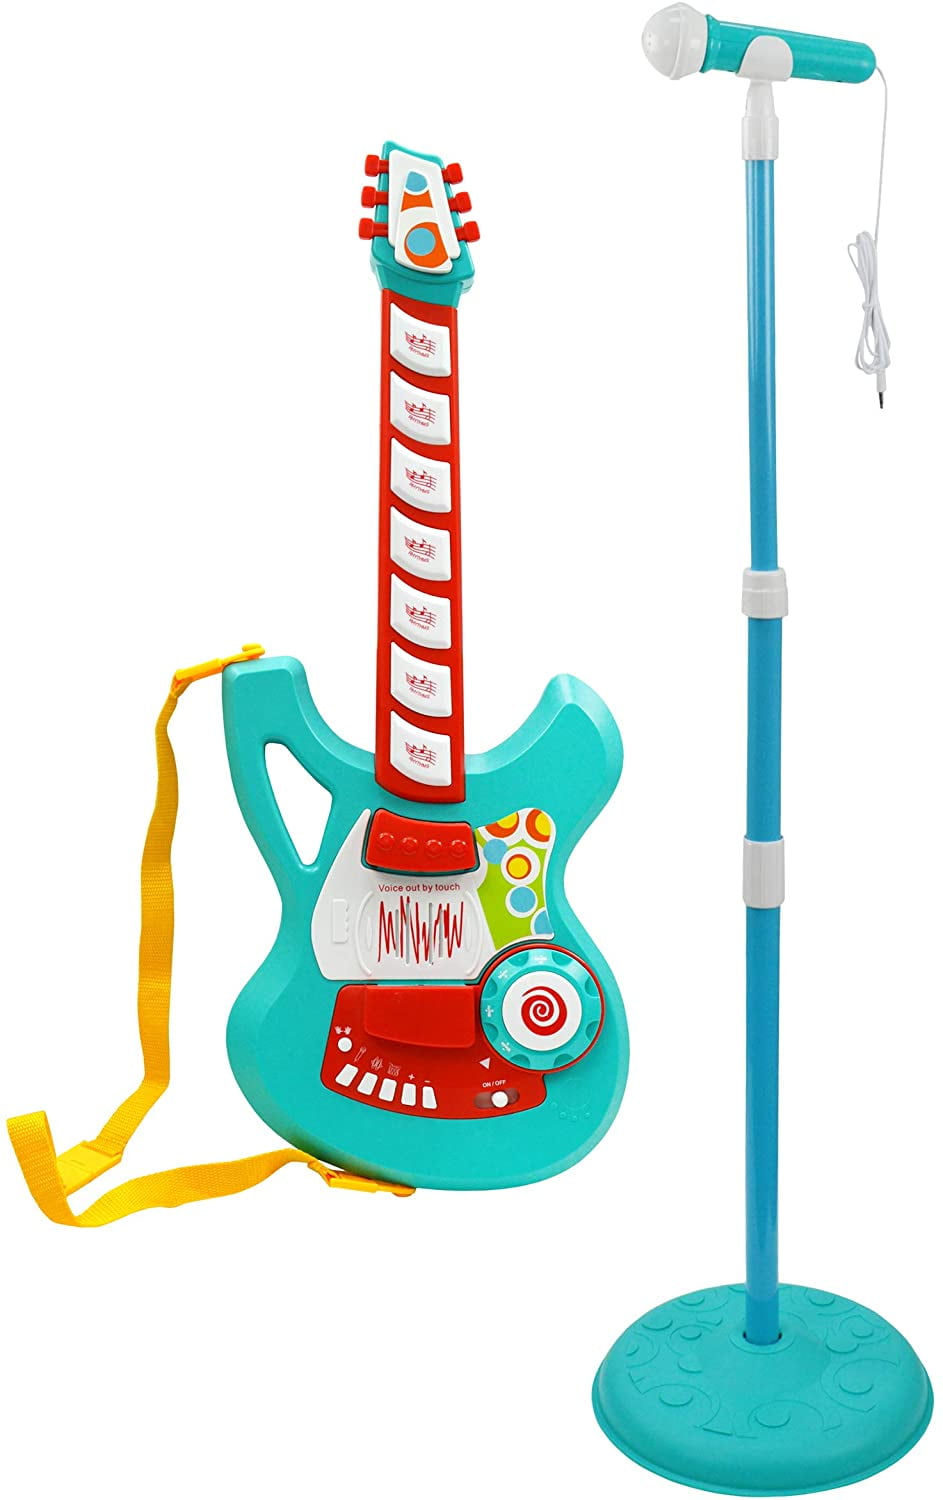 Guitar Toy,Multifunctional Kids Bass Guitar Electric Guitar Toy with Sound O0E6 